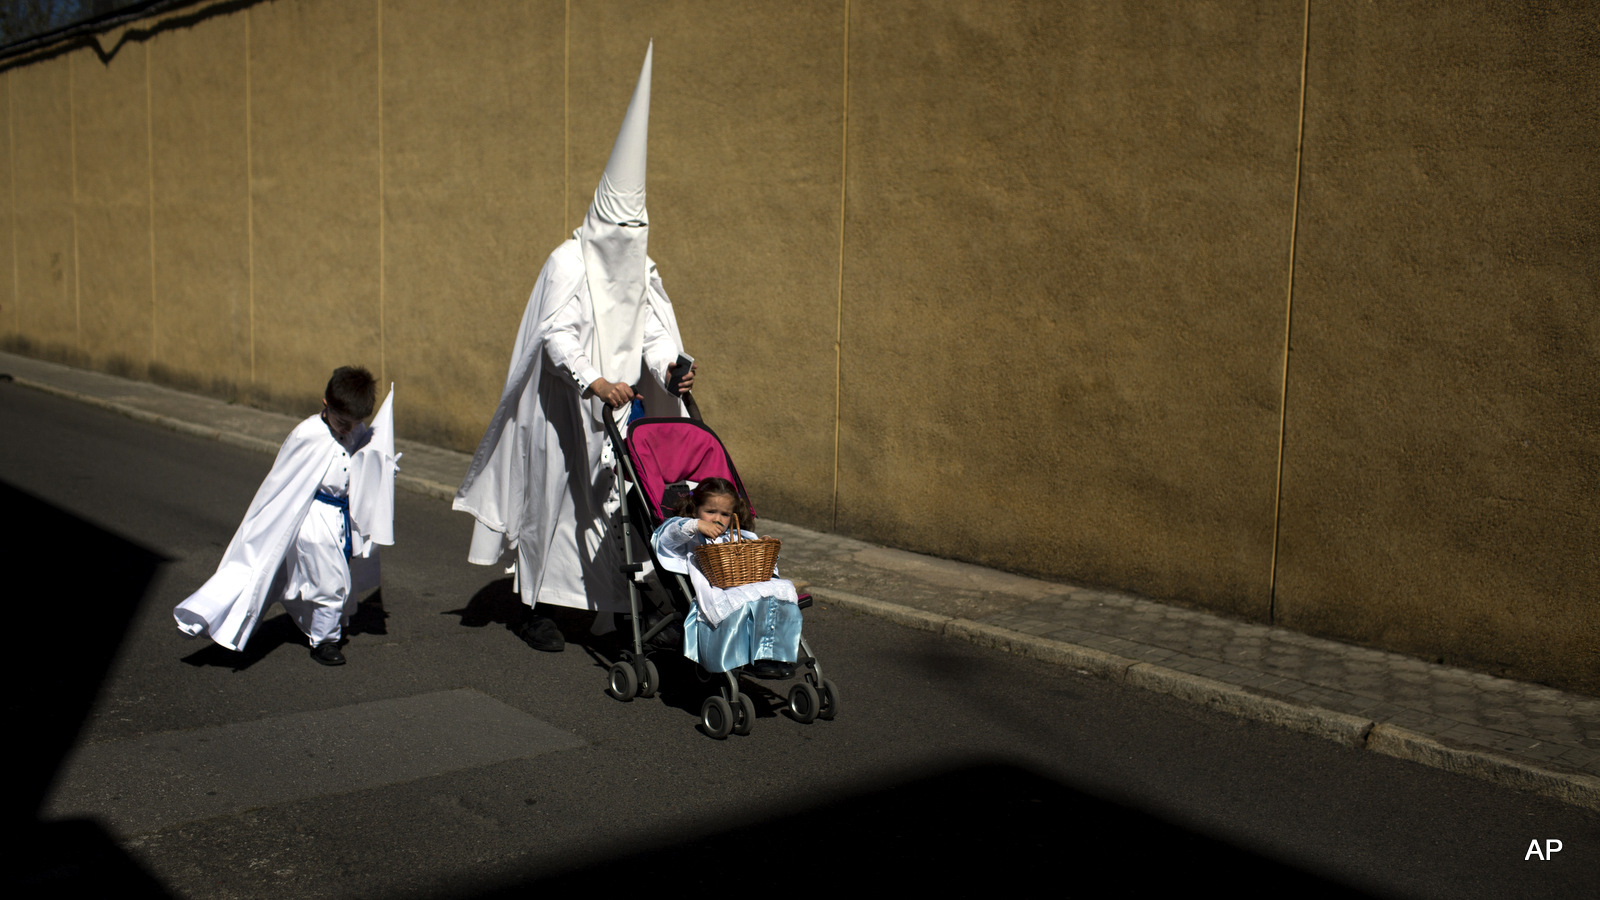 Penitents from the La Paz brotherhood walk to the church to take part in a procession in Seville, Spain, Sunday, March 29, 2015. Hundreds of processions take place throughout Spain during the Easter Holy Week.